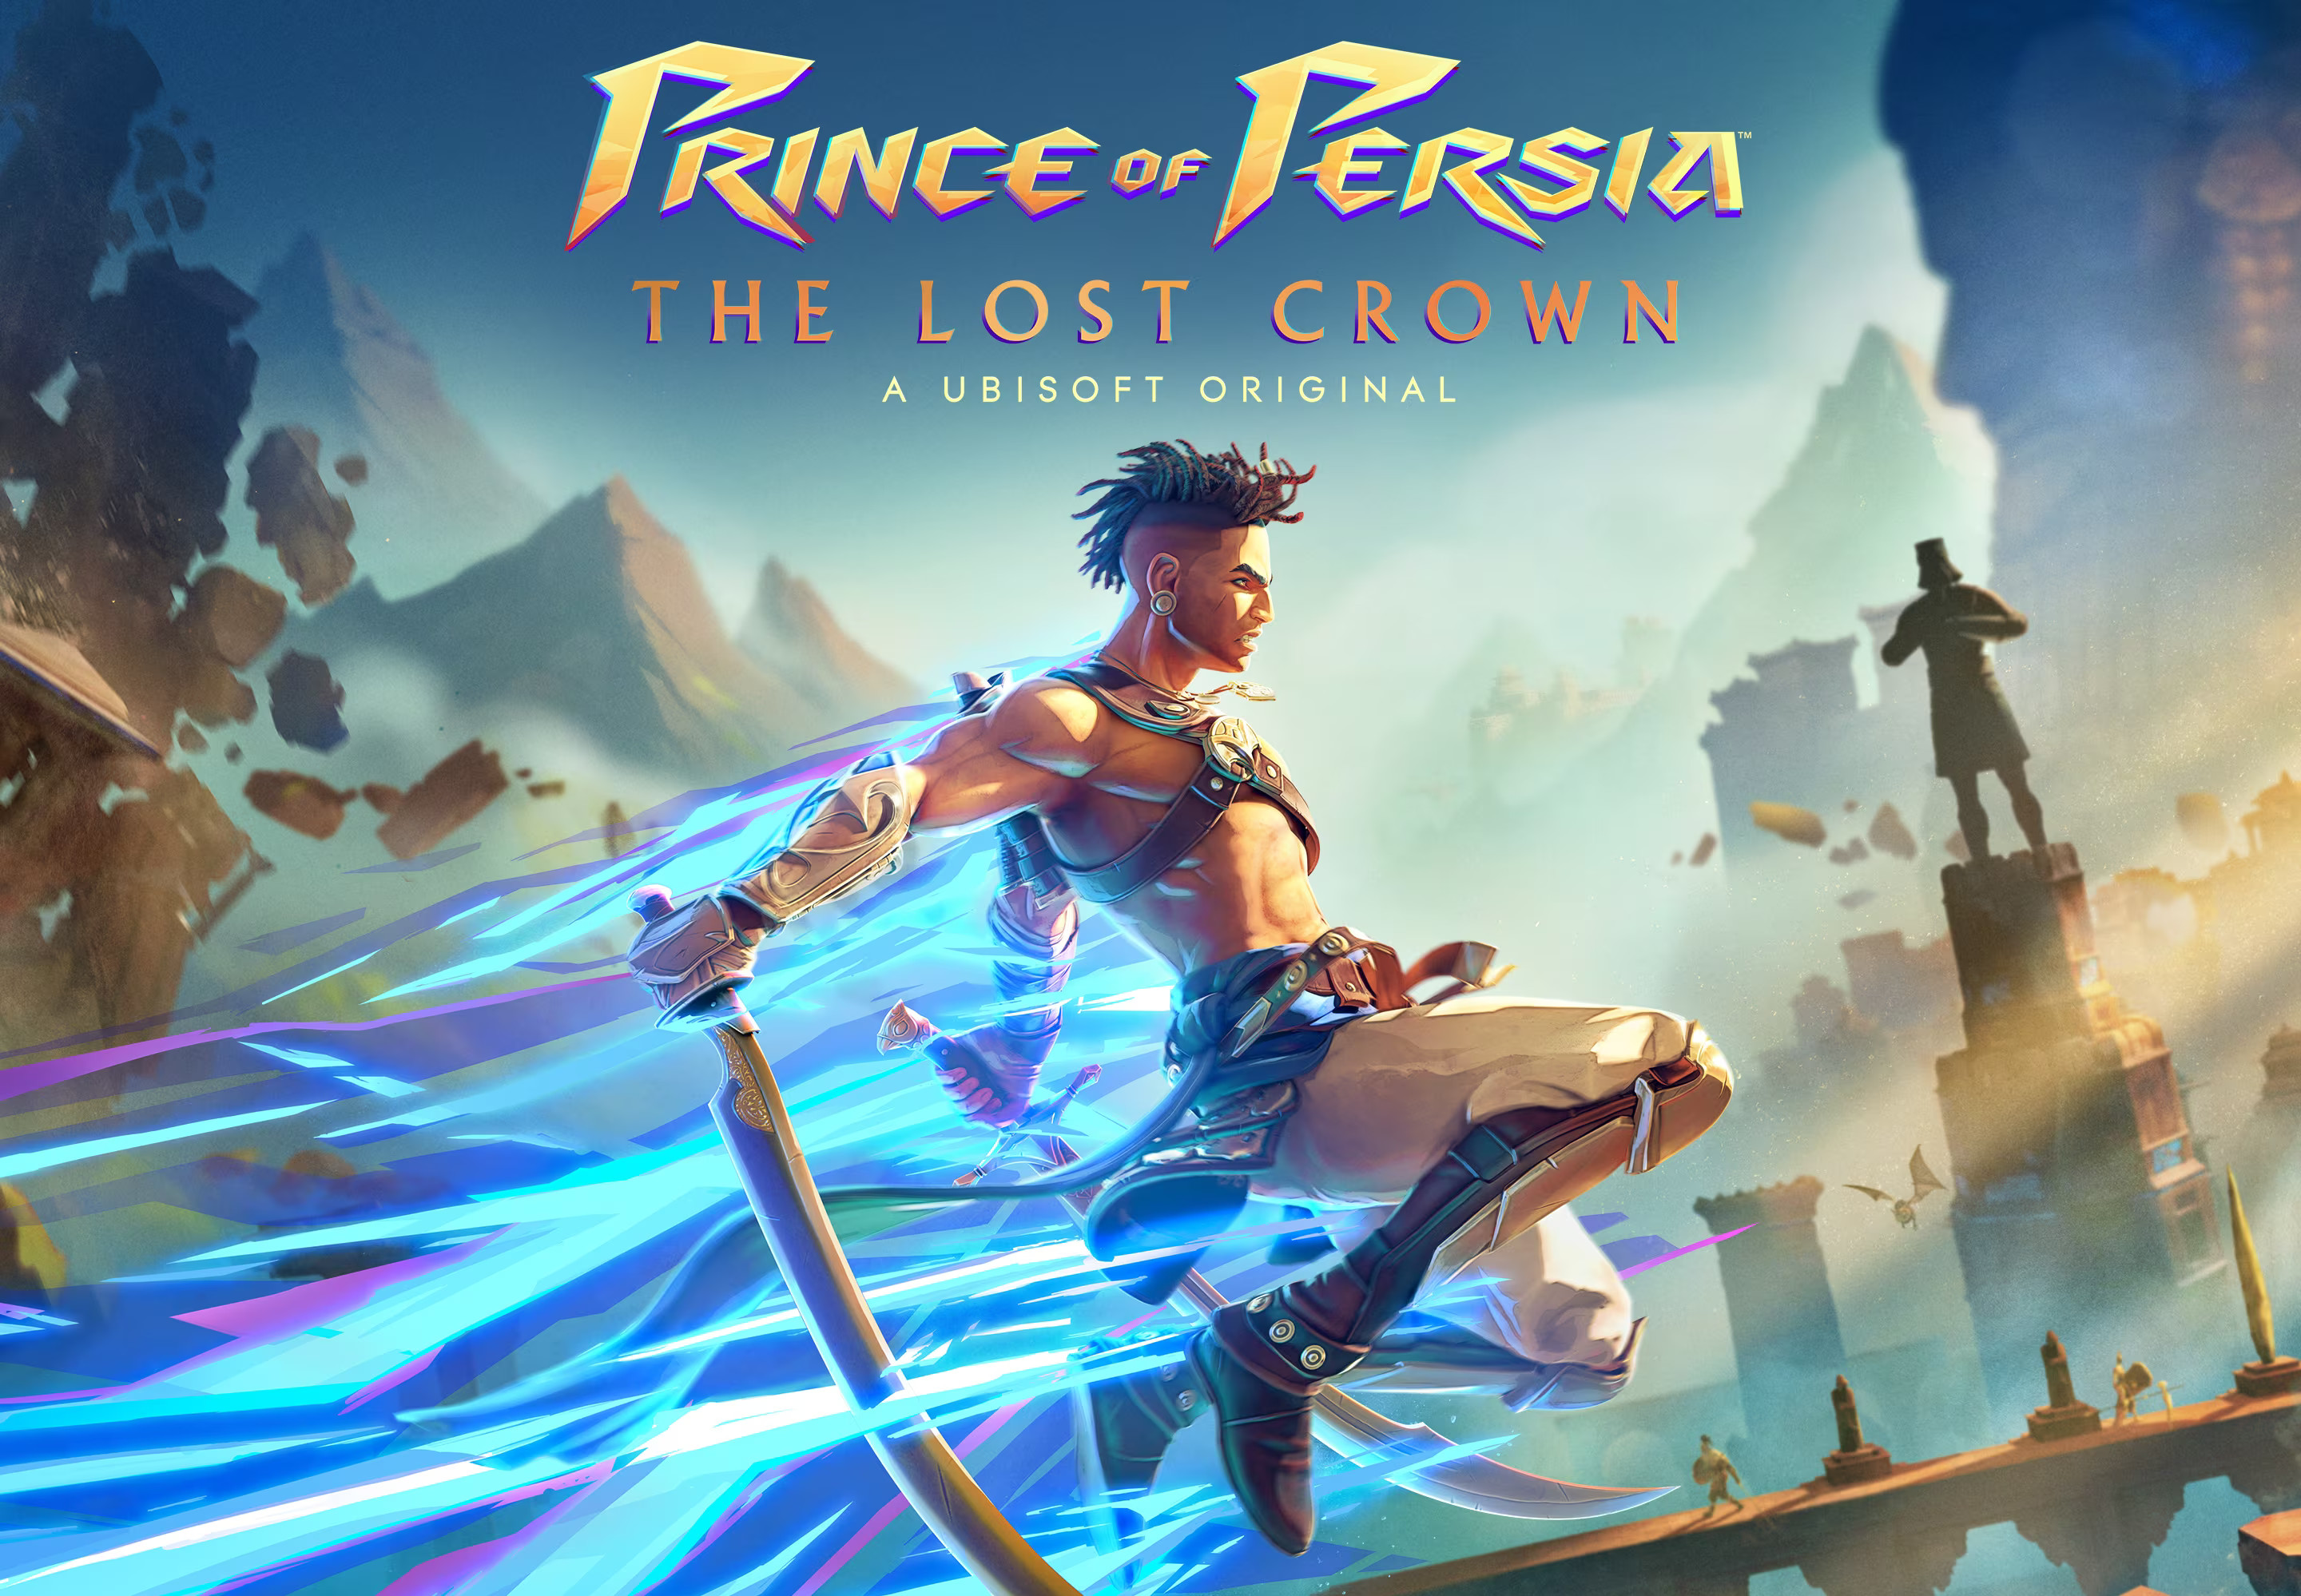 Prince Of Persia: The Lost Crown EU Ubisoft Voucher